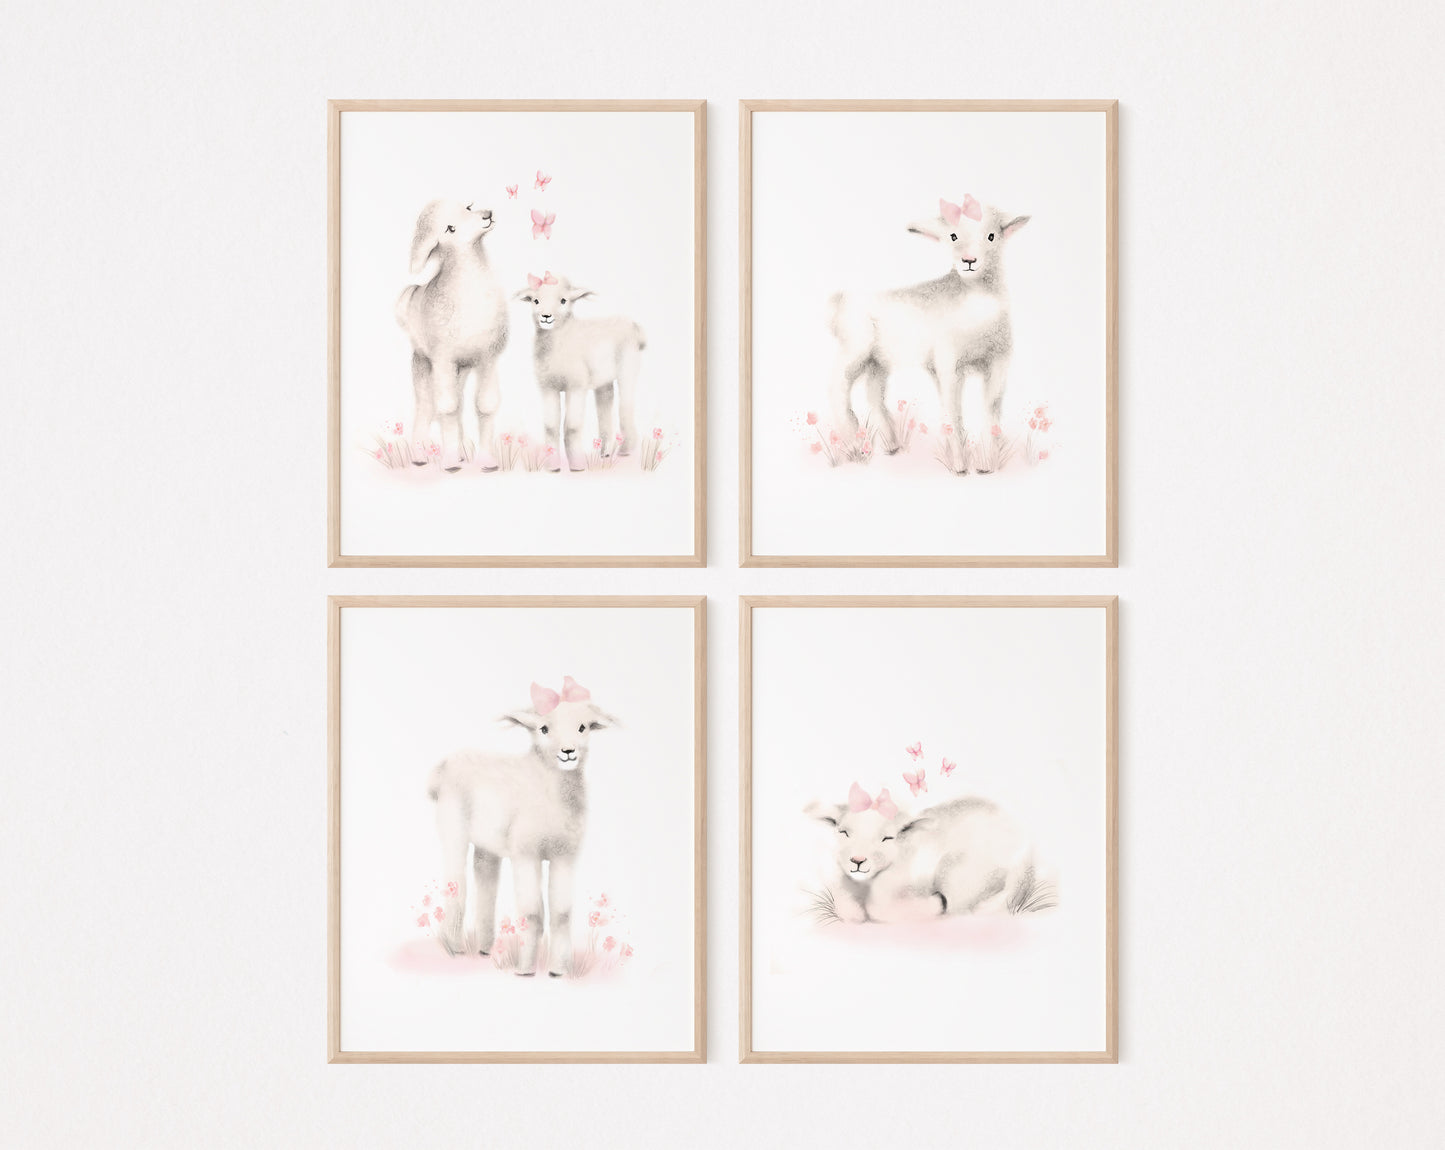 Set of 4 lamb prints from drawings in tones of sepia beige and blush pink. Lambs have pink flowers, bows and butterflies around them. The prints are on a white background and are framed in light wood frames.  The set hangs against a plain light pink background - Studio Q - Art by Nicky Quartermaine Scott